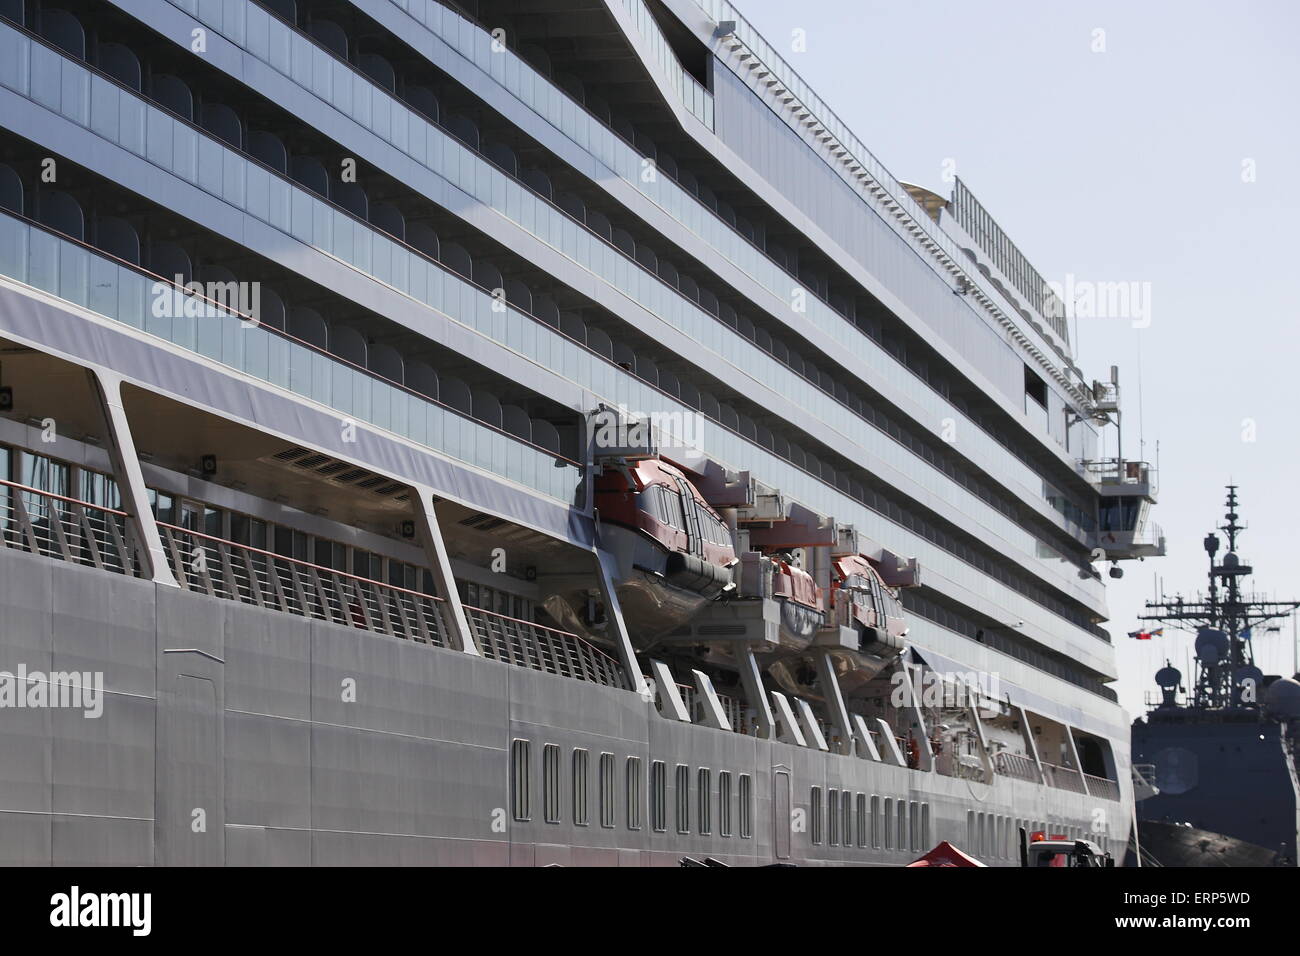 Gdynia,Poland, 6th, June 2015 The Viking Star criuse ship under the Norwegian flag sits at Gdynia port. The ship is  228 metres long and 29 metres wide. It can take 930 passangers and has 602 crew members Credit:  Michal Fludra/Alamy Live News Stock Photo